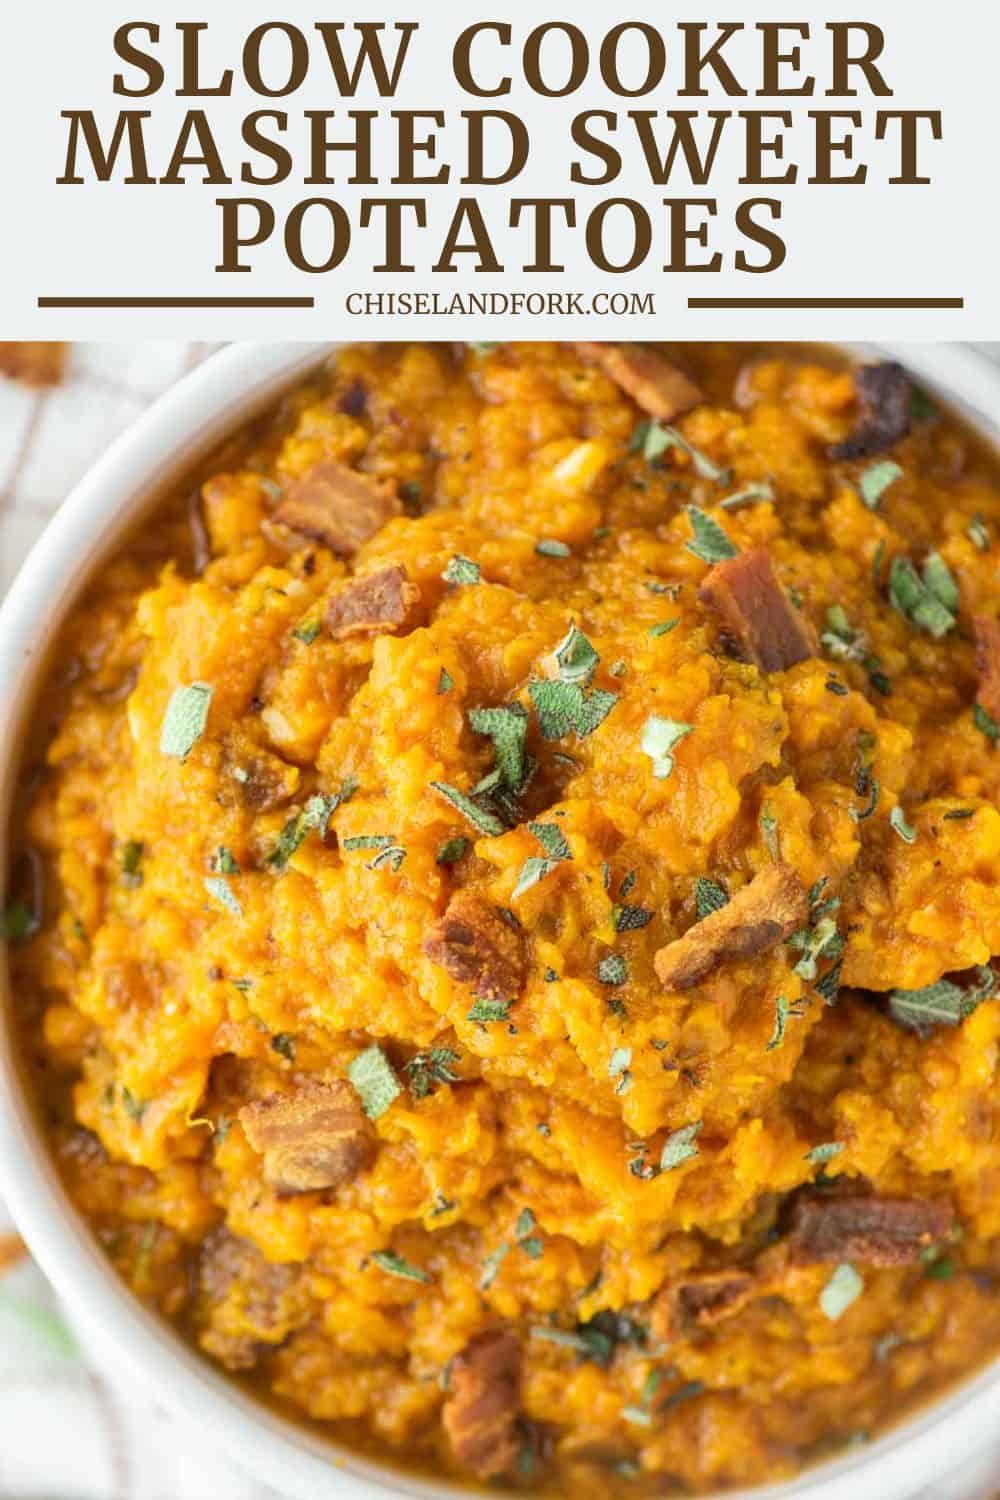 Slow Cooker Mashed Sweet Potatoes Recipe - Chisel & Fork